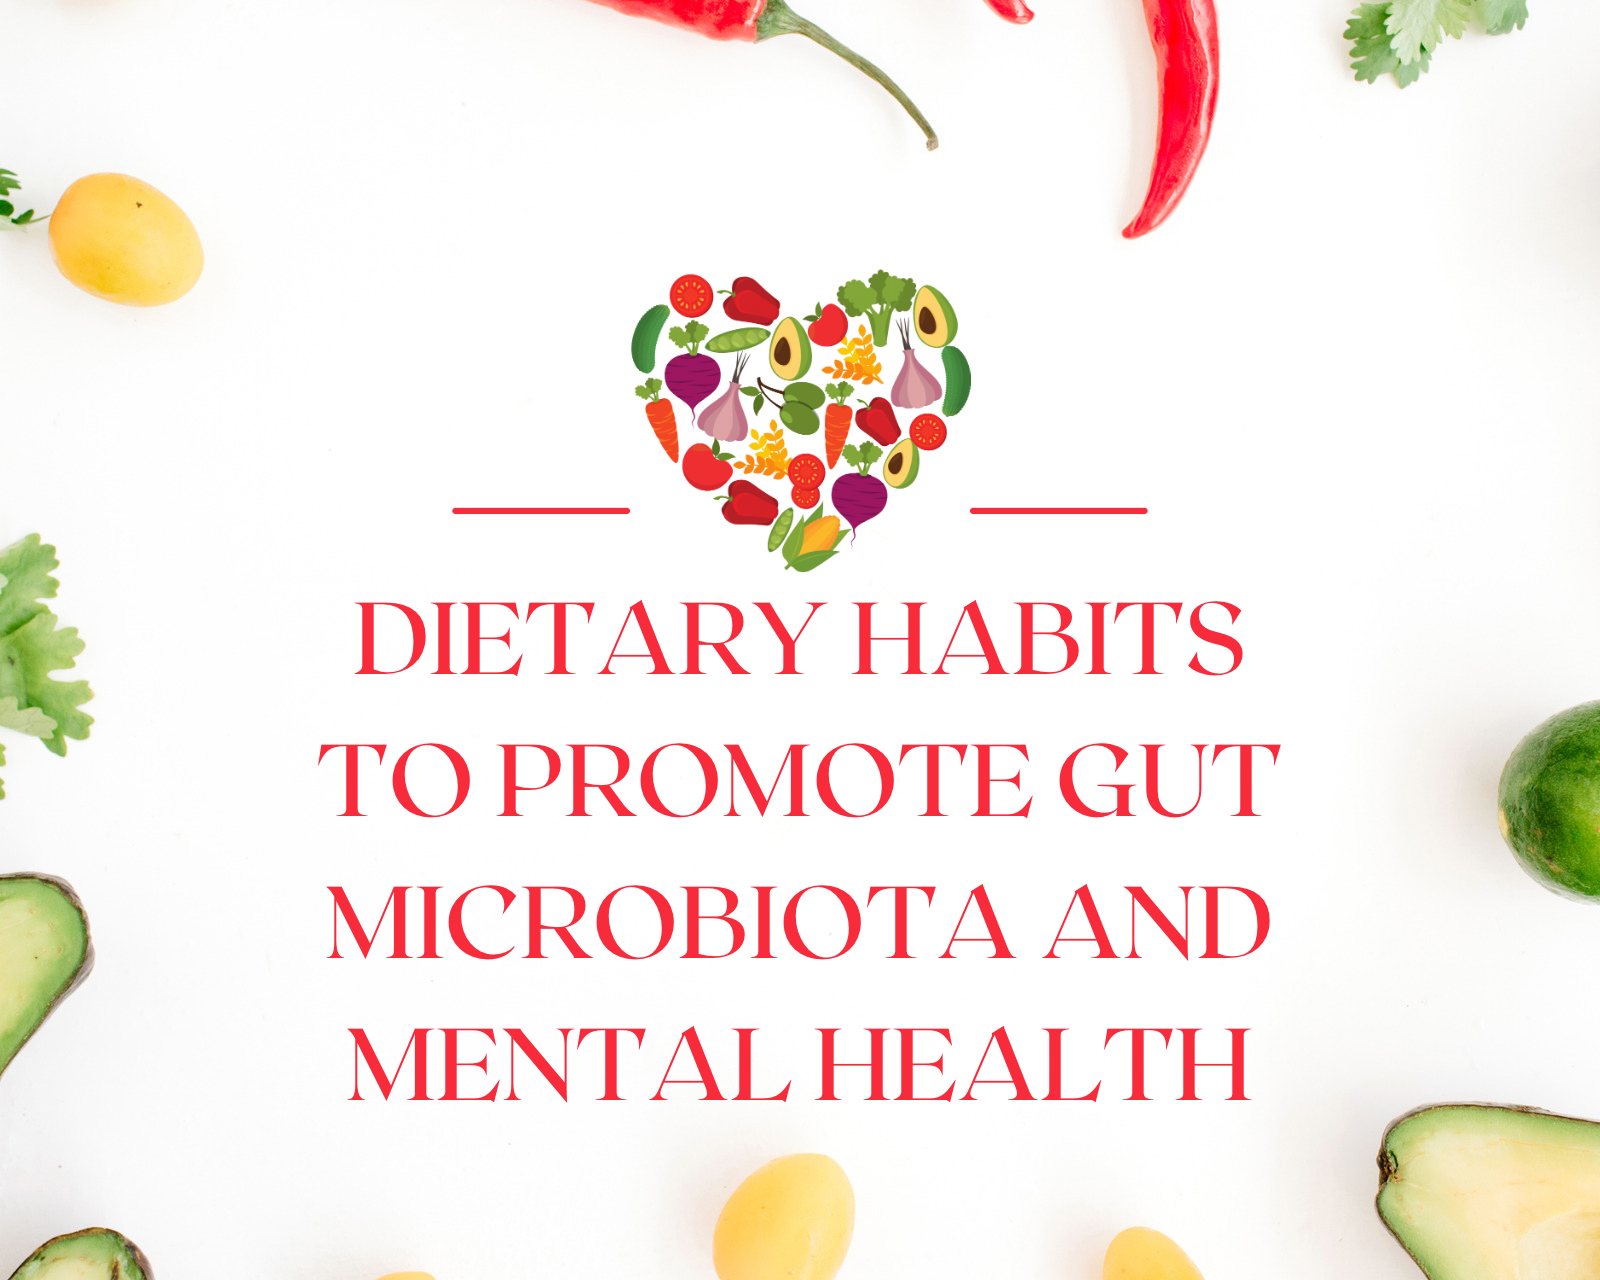 Dietary habits to promote gut microbiota and mental health